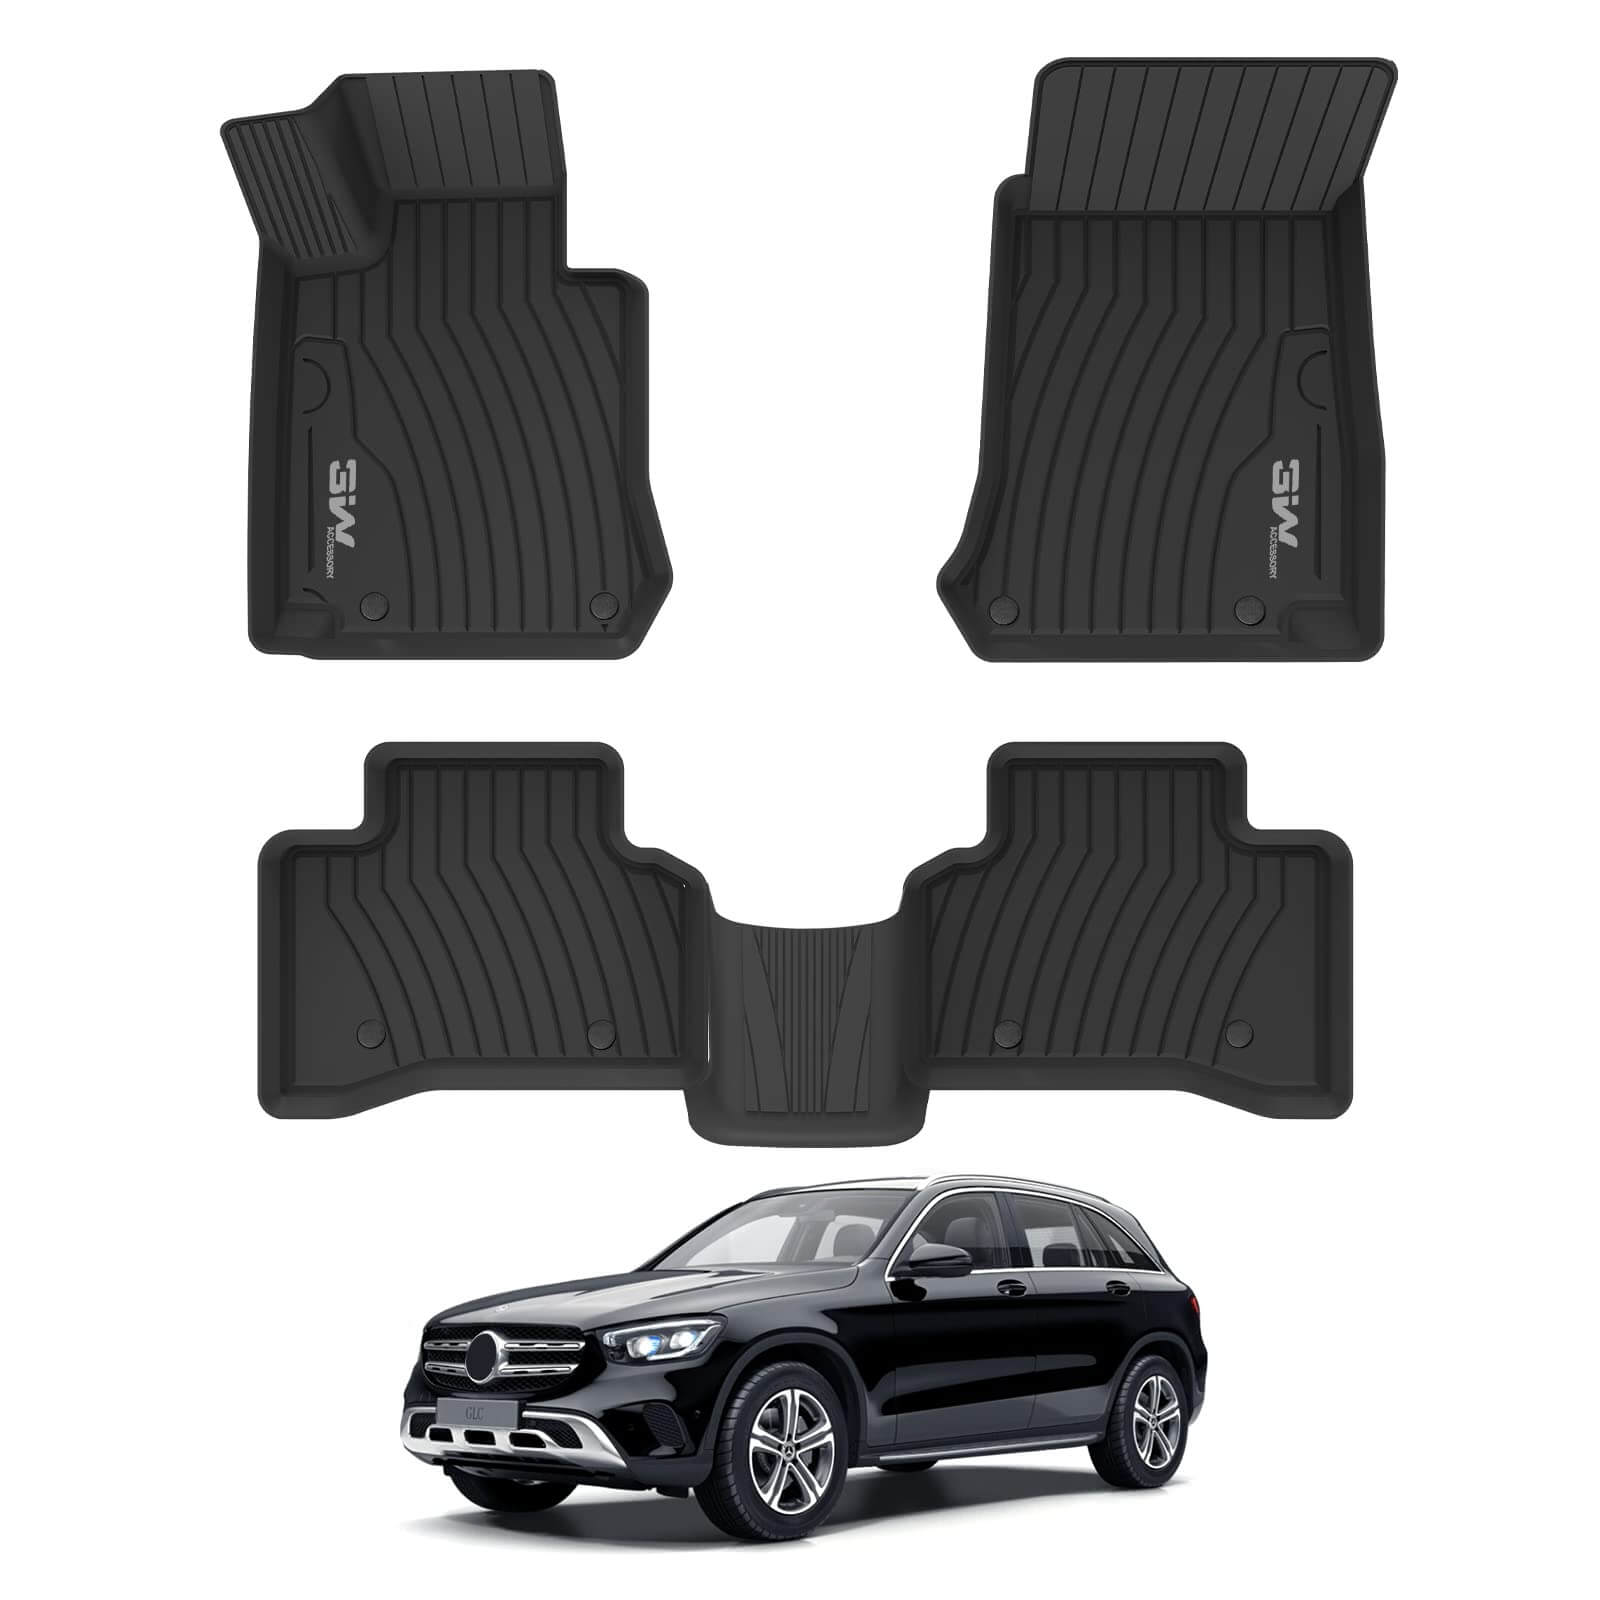 3W Mercedes-Benz GLC 2023 2024 Custom Floor Mats / Trunk Mat TPE Material & All-Weather Protection Vehicles & Parts 3Wliners 2023-2024 GLC 2023-2024 1st&2nd Row Mats